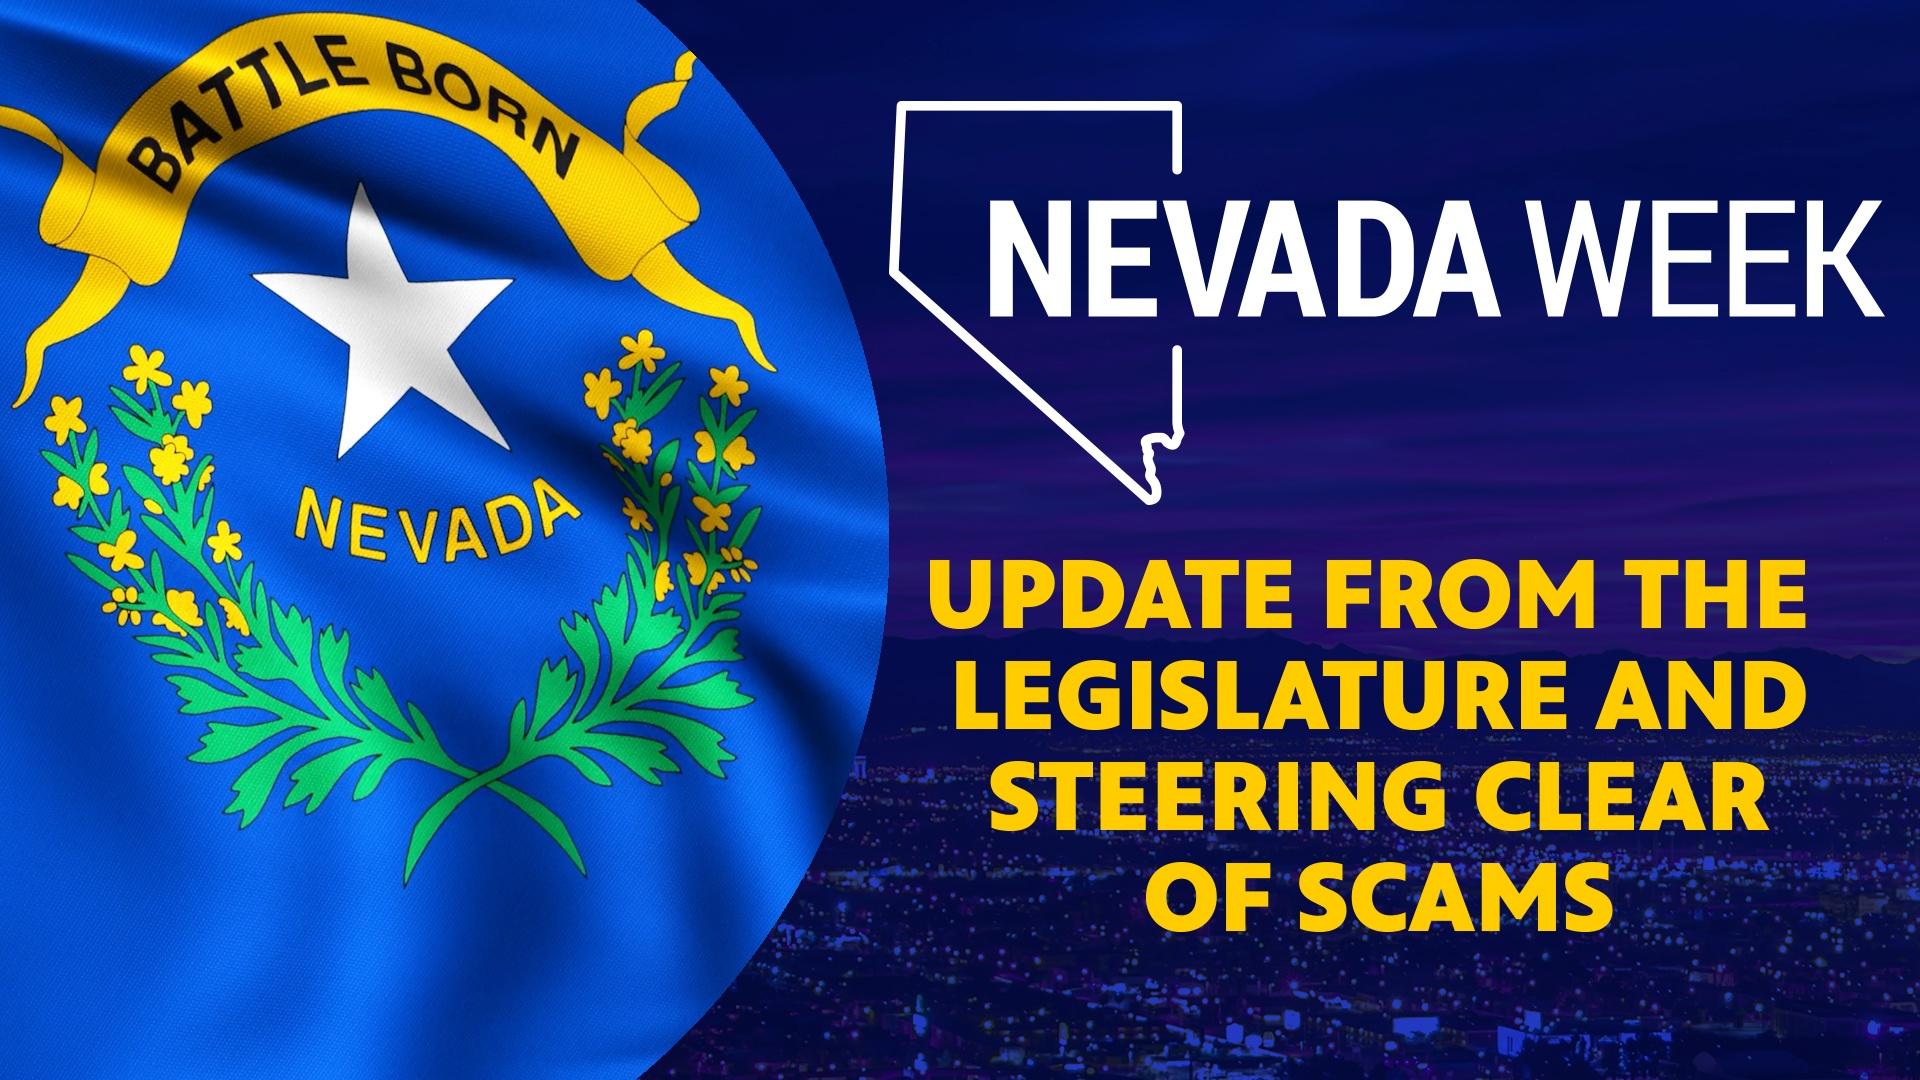 Update from the Legislature and Steering Clear of Scams